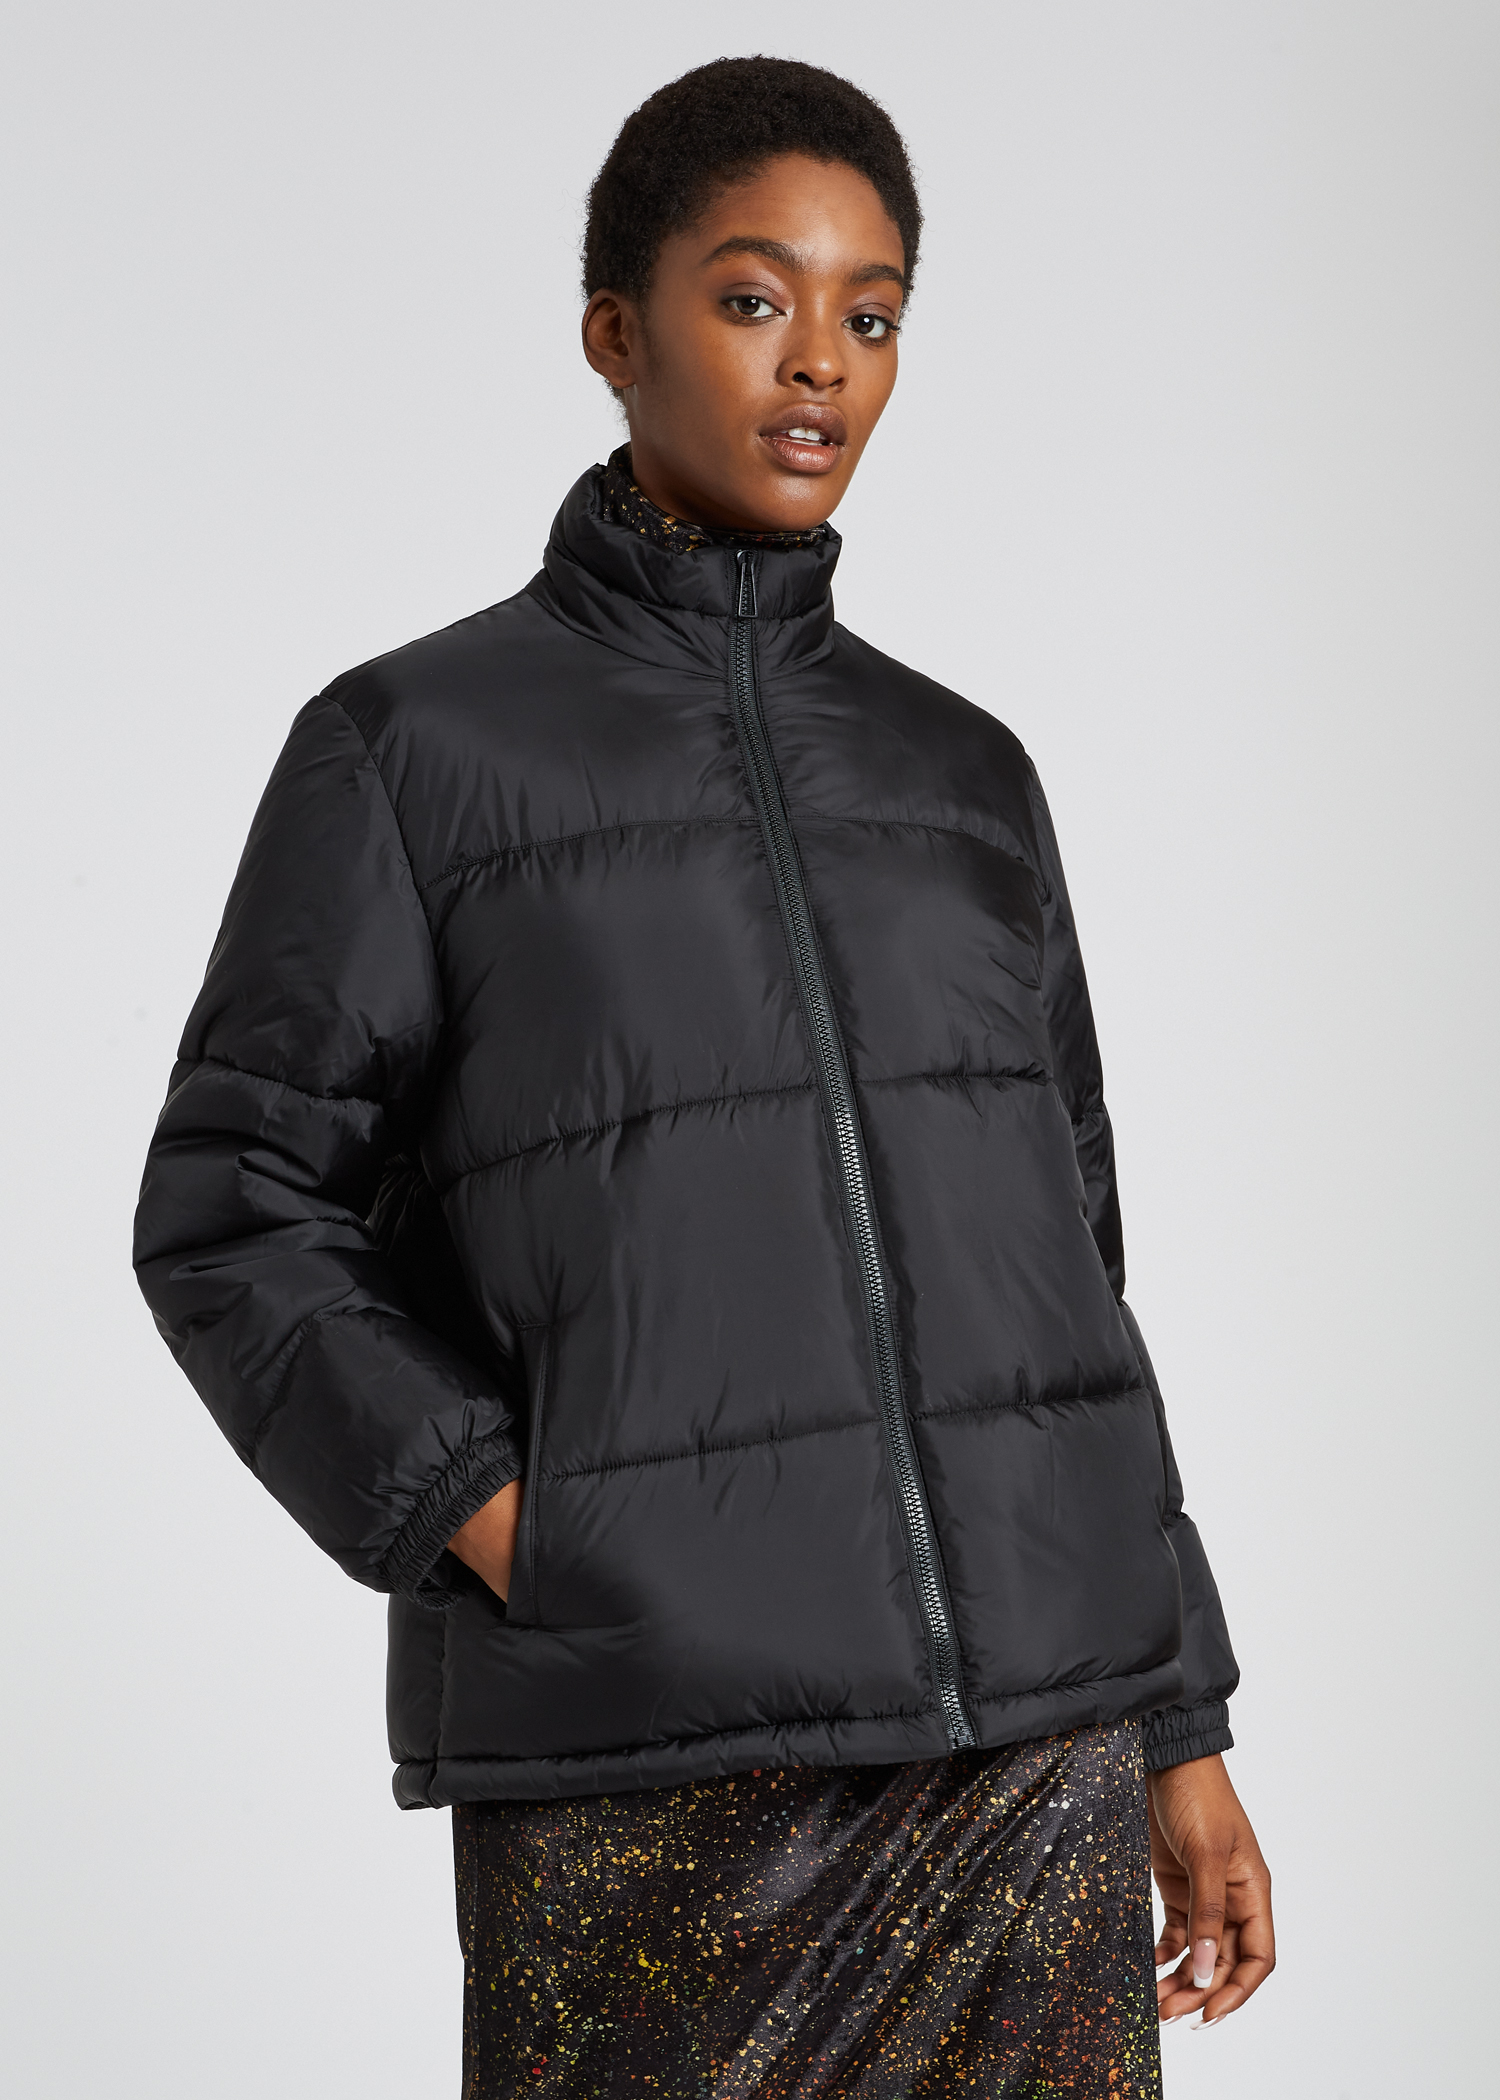 Model view - Women's Black Recycled Polyester Wadded Jacket Paul Smith